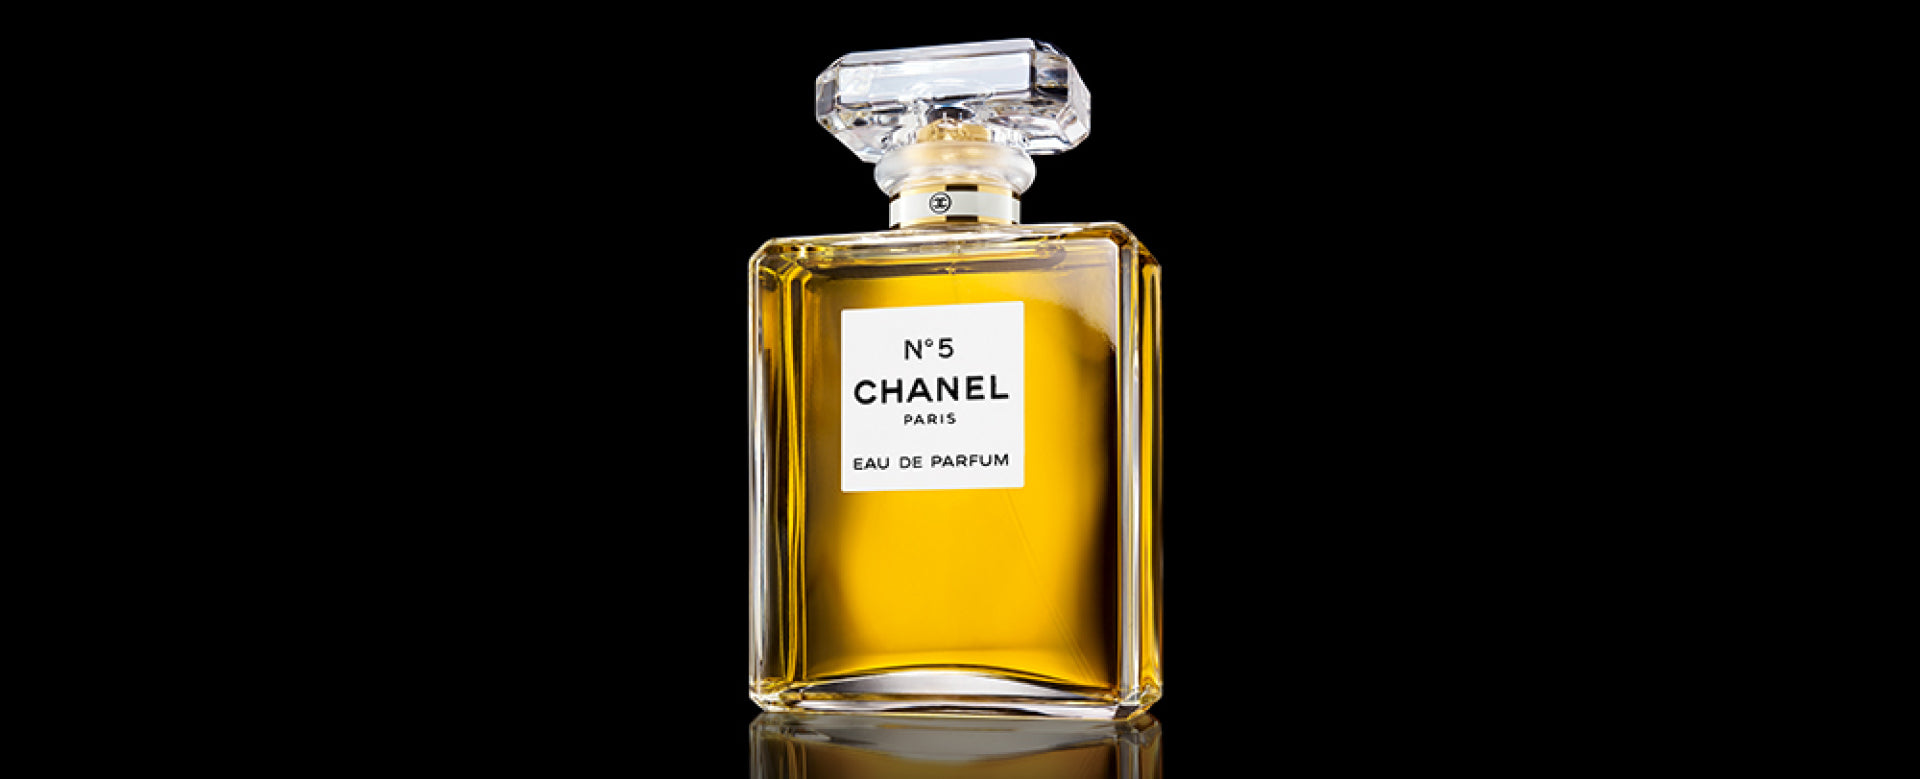 UK perfume shops hope new Chanel fragrance can mask foul sales, Retail  industry